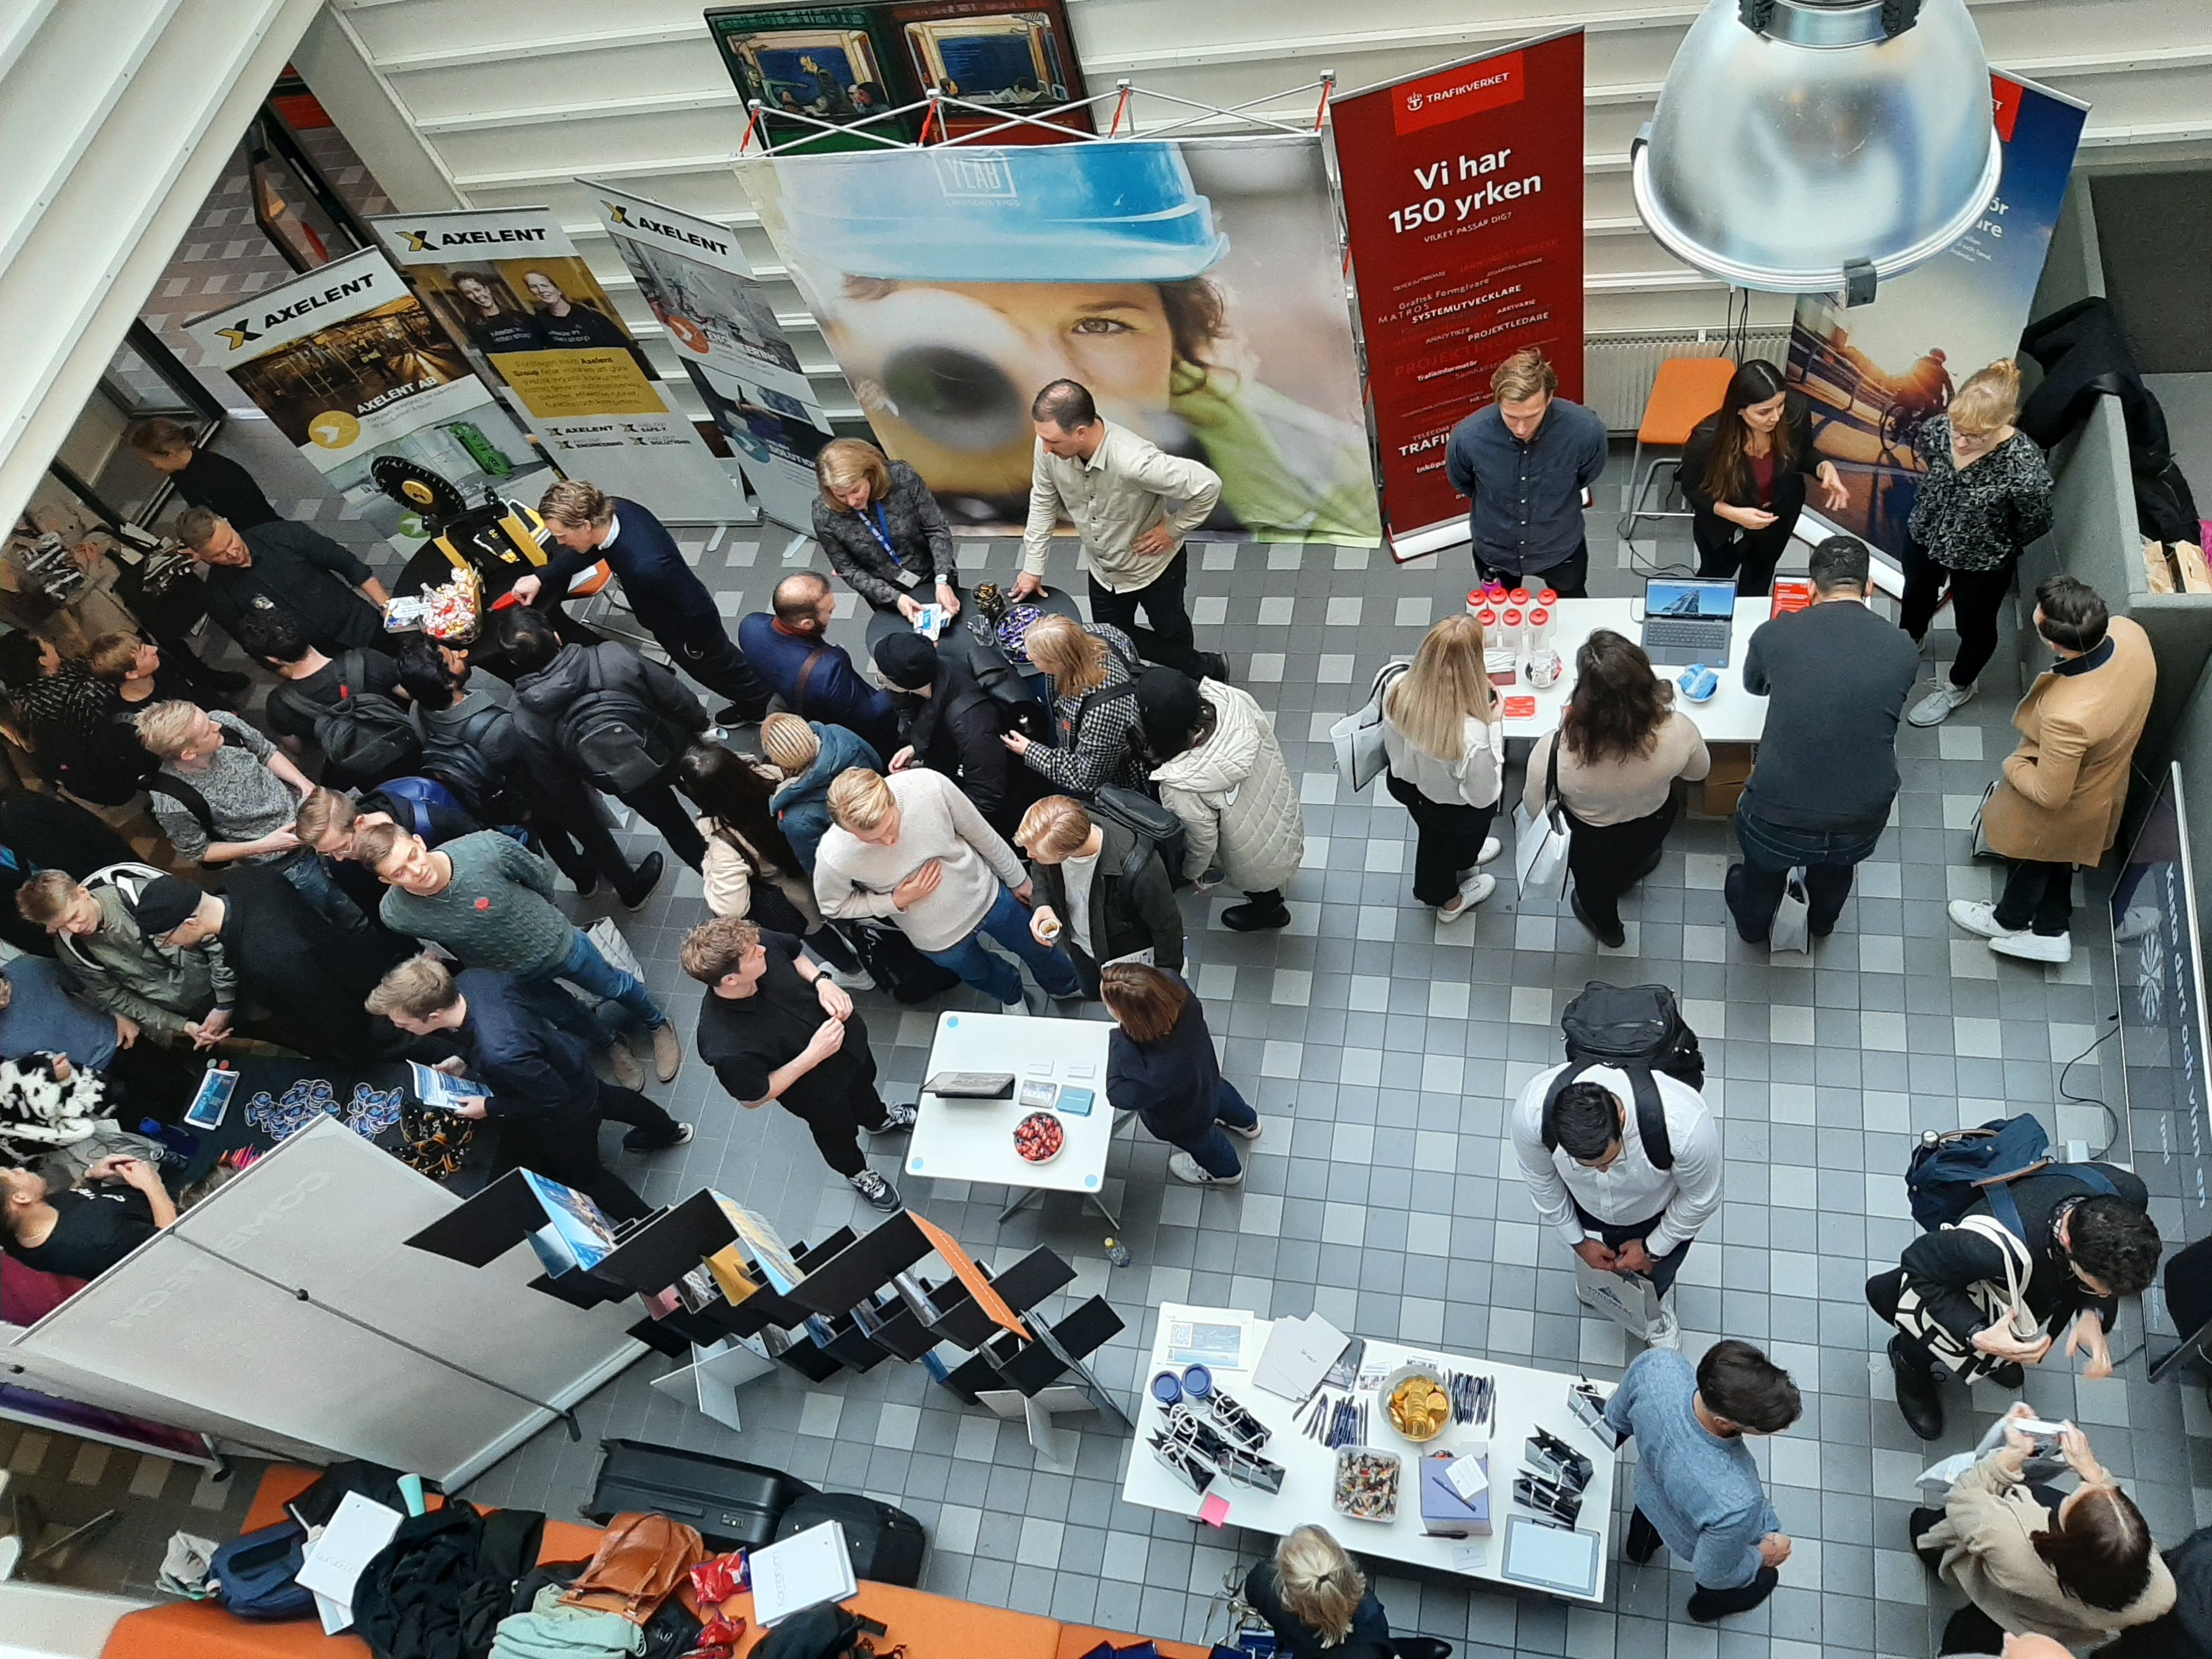 The career day at the School of Engineering, Jönköping University.